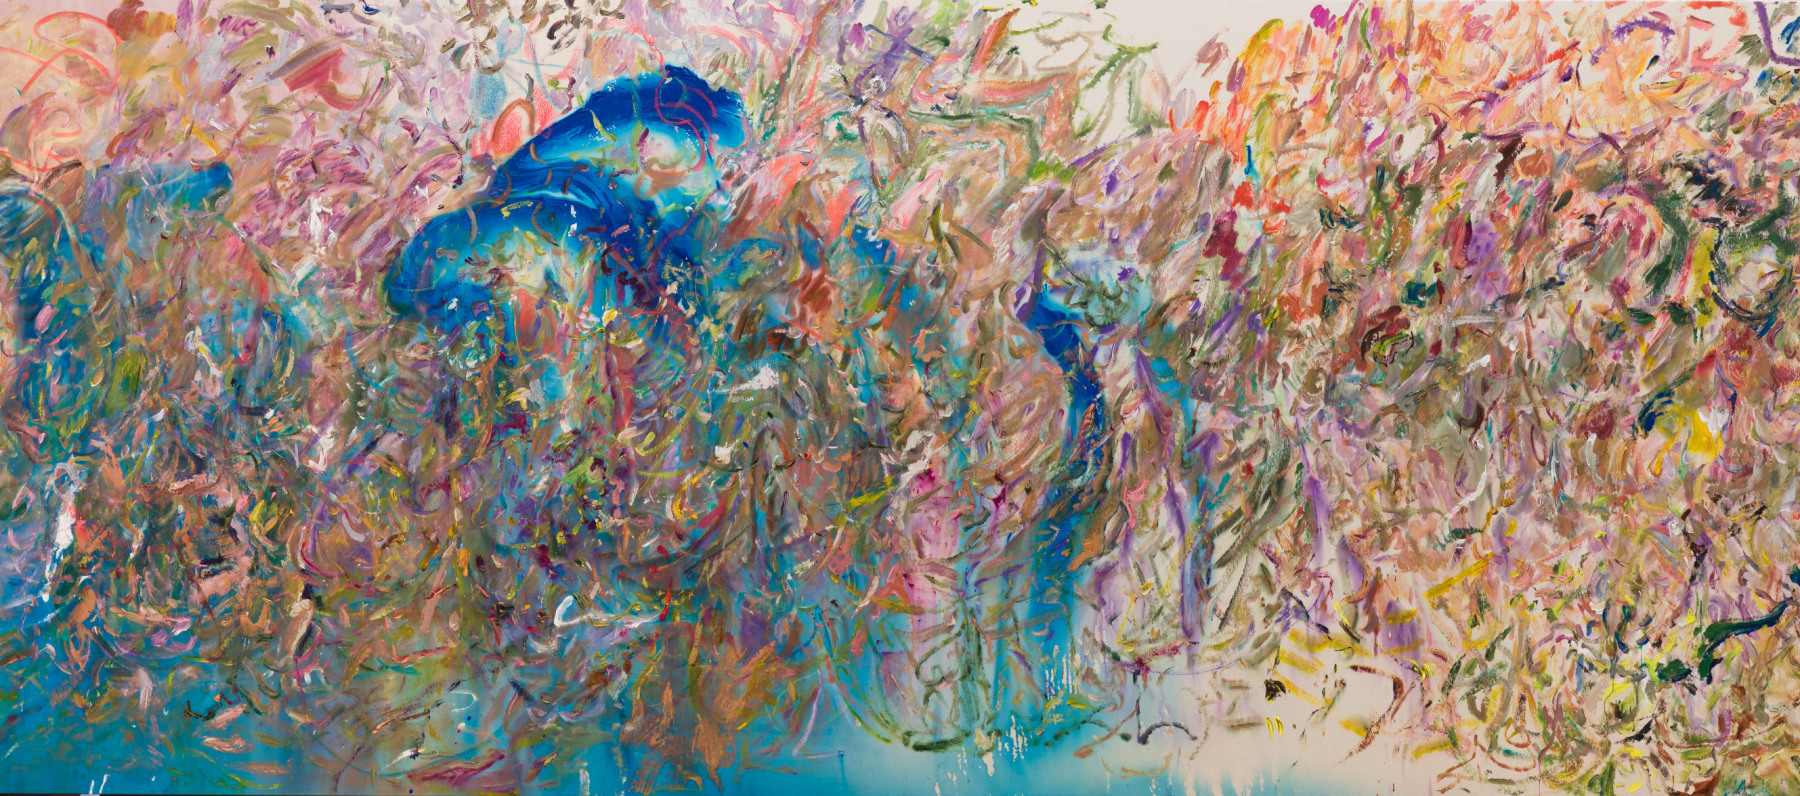 Larry Poons - Artists - Yares Art